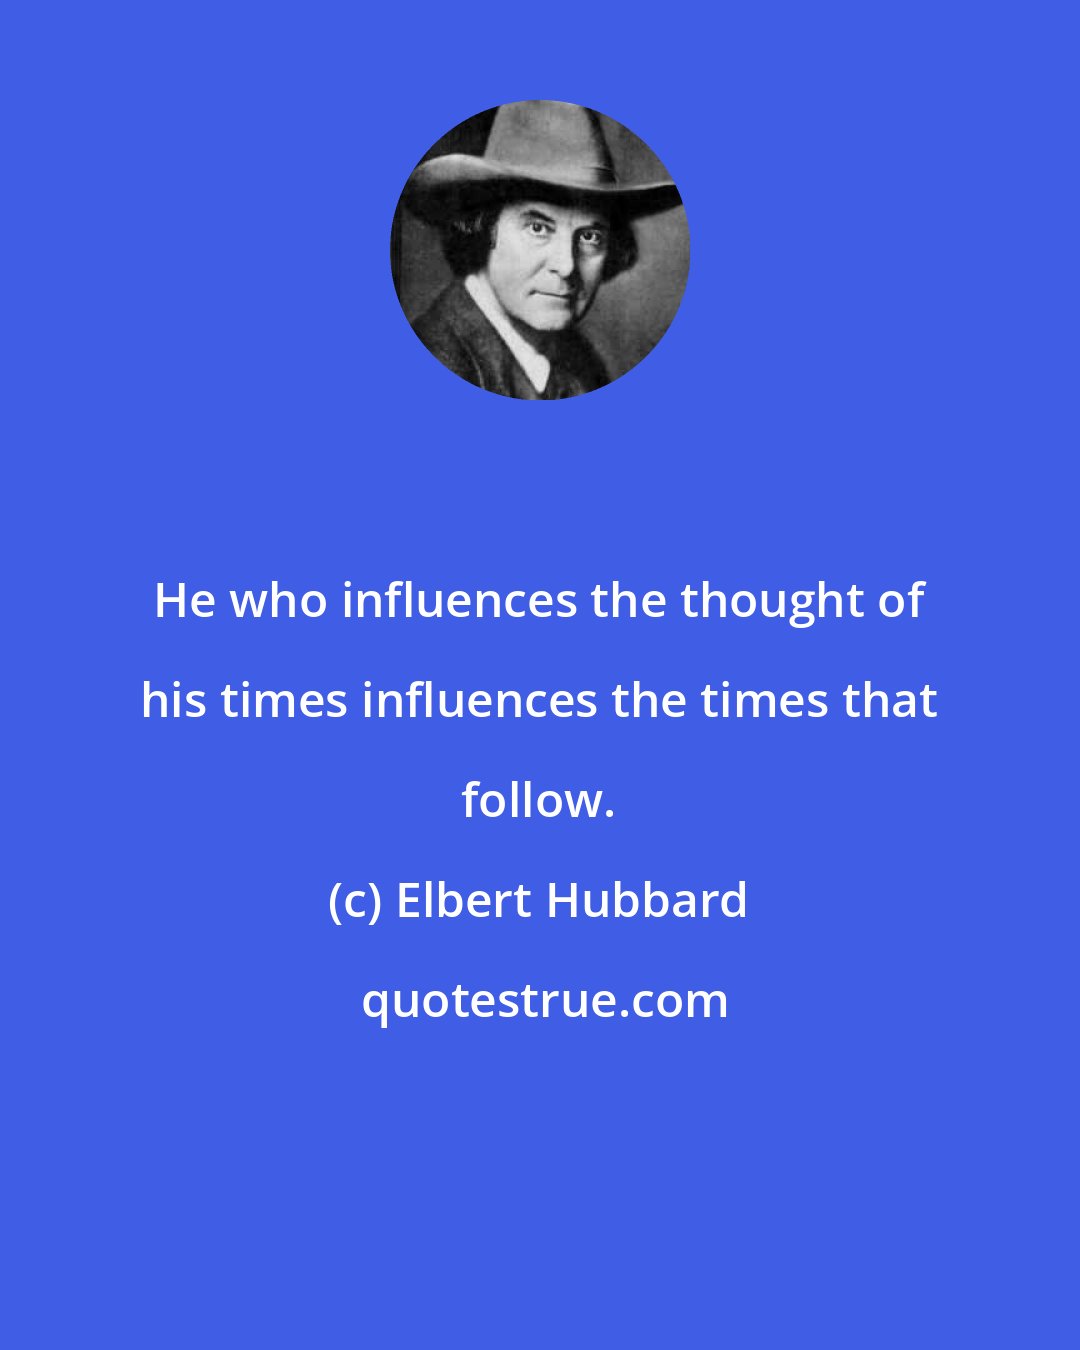 Elbert Hubbard: He who influences the thought of his times influences the times that follow.